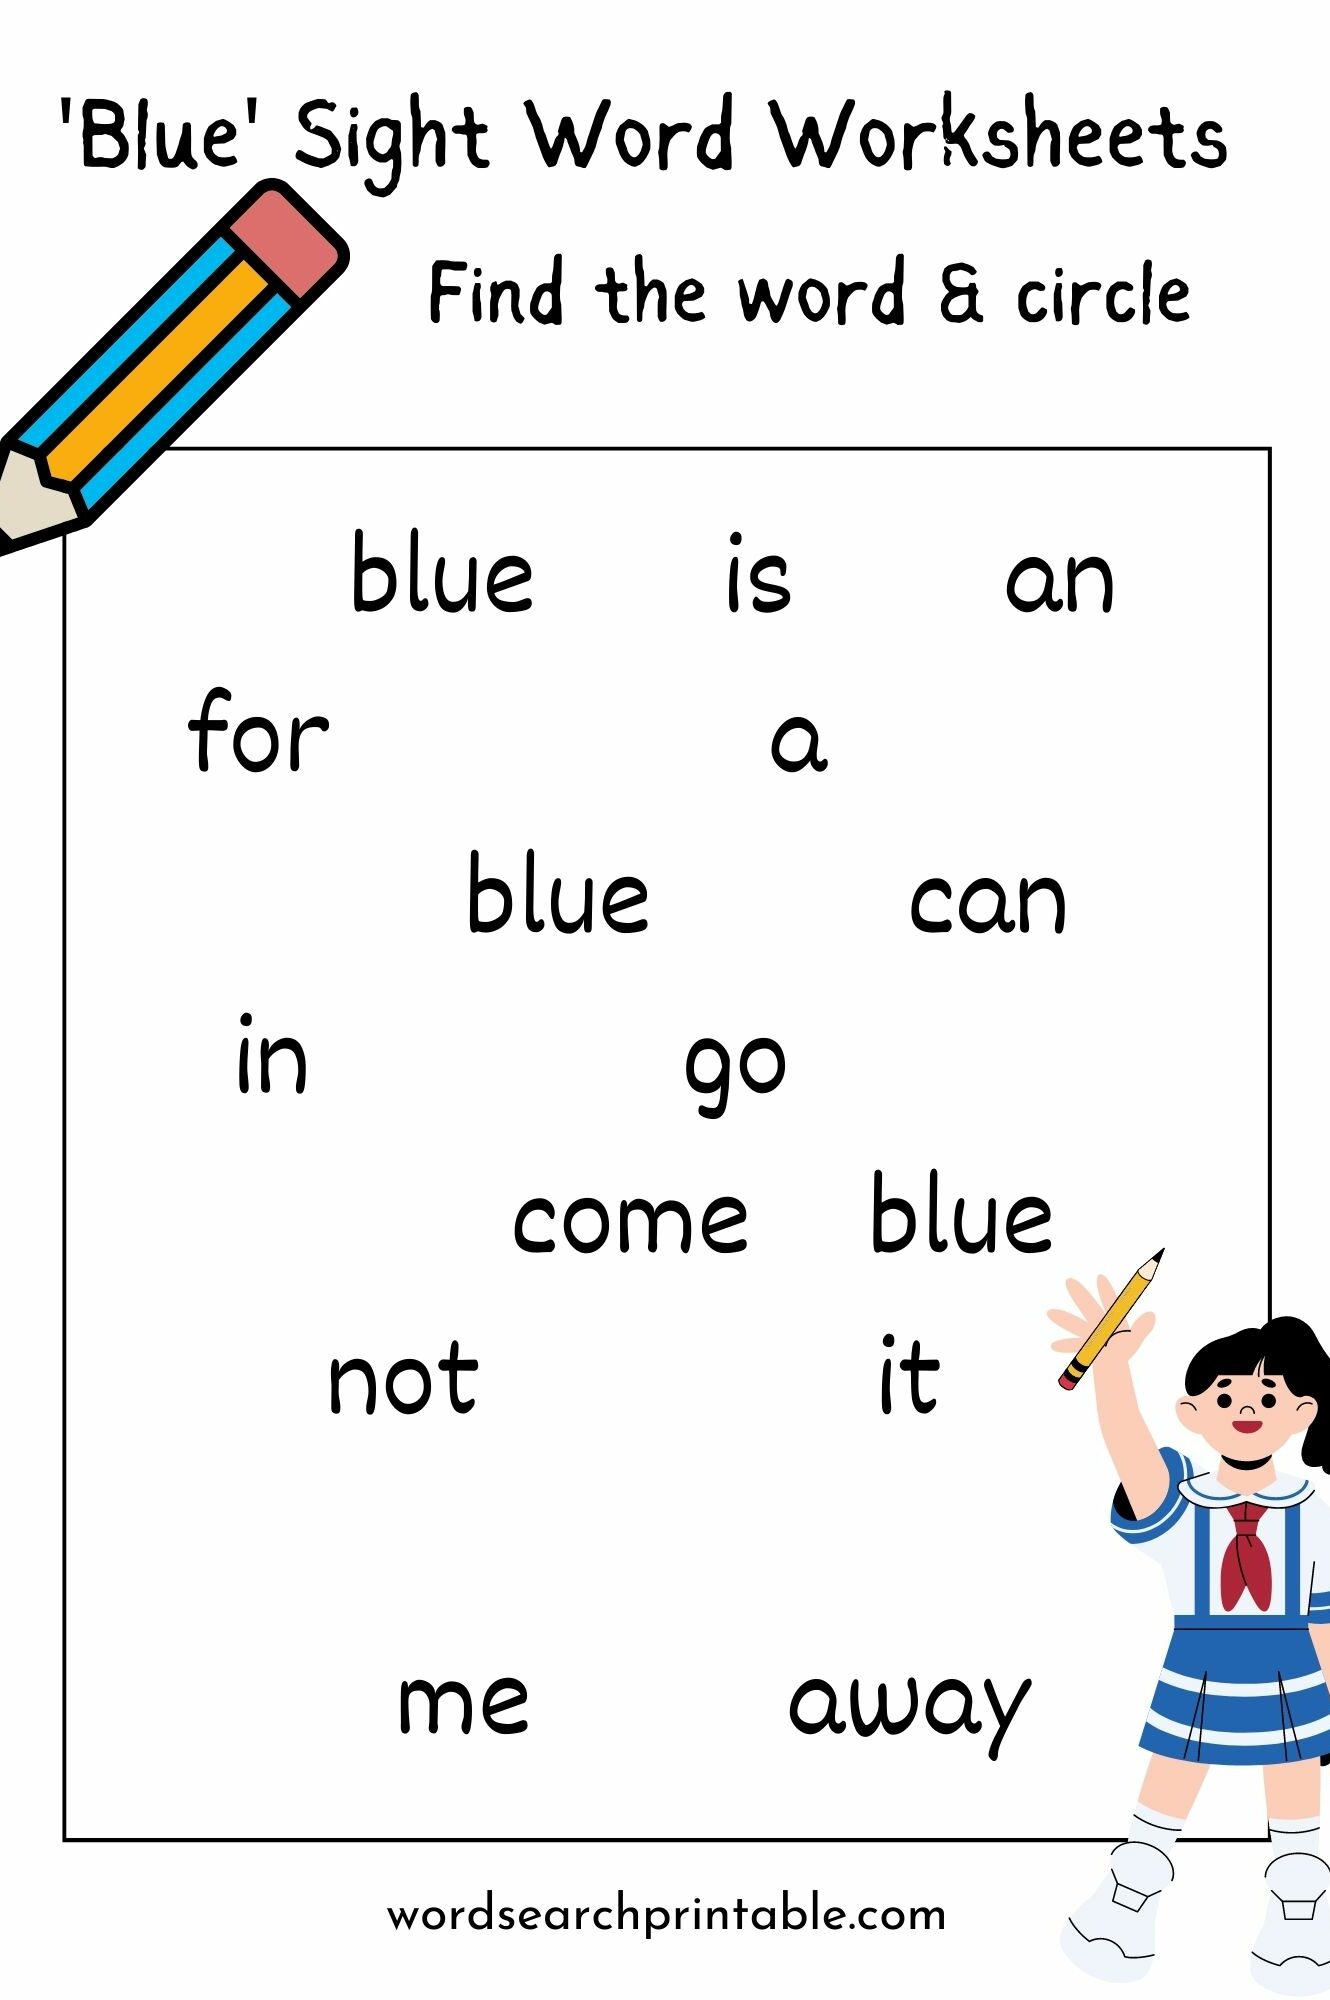 Find the word “Blue” and circle it - sight word blue worksheet